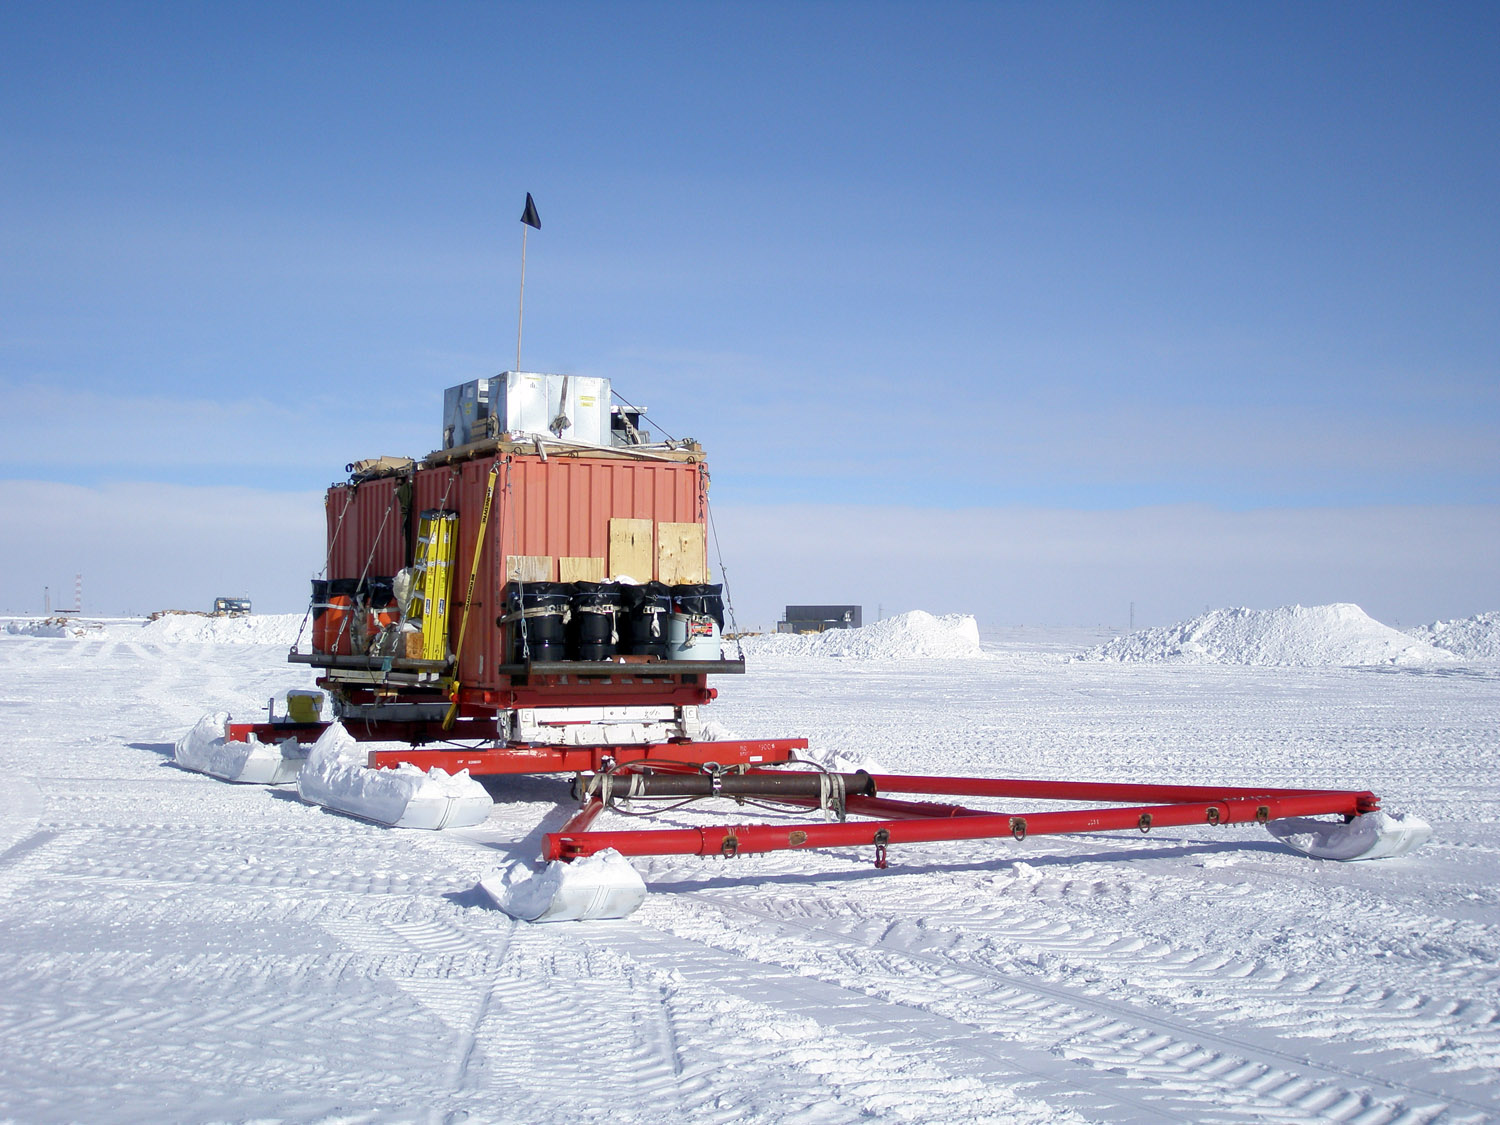 Vehicles and equipment of the South Pole Traverse - 06